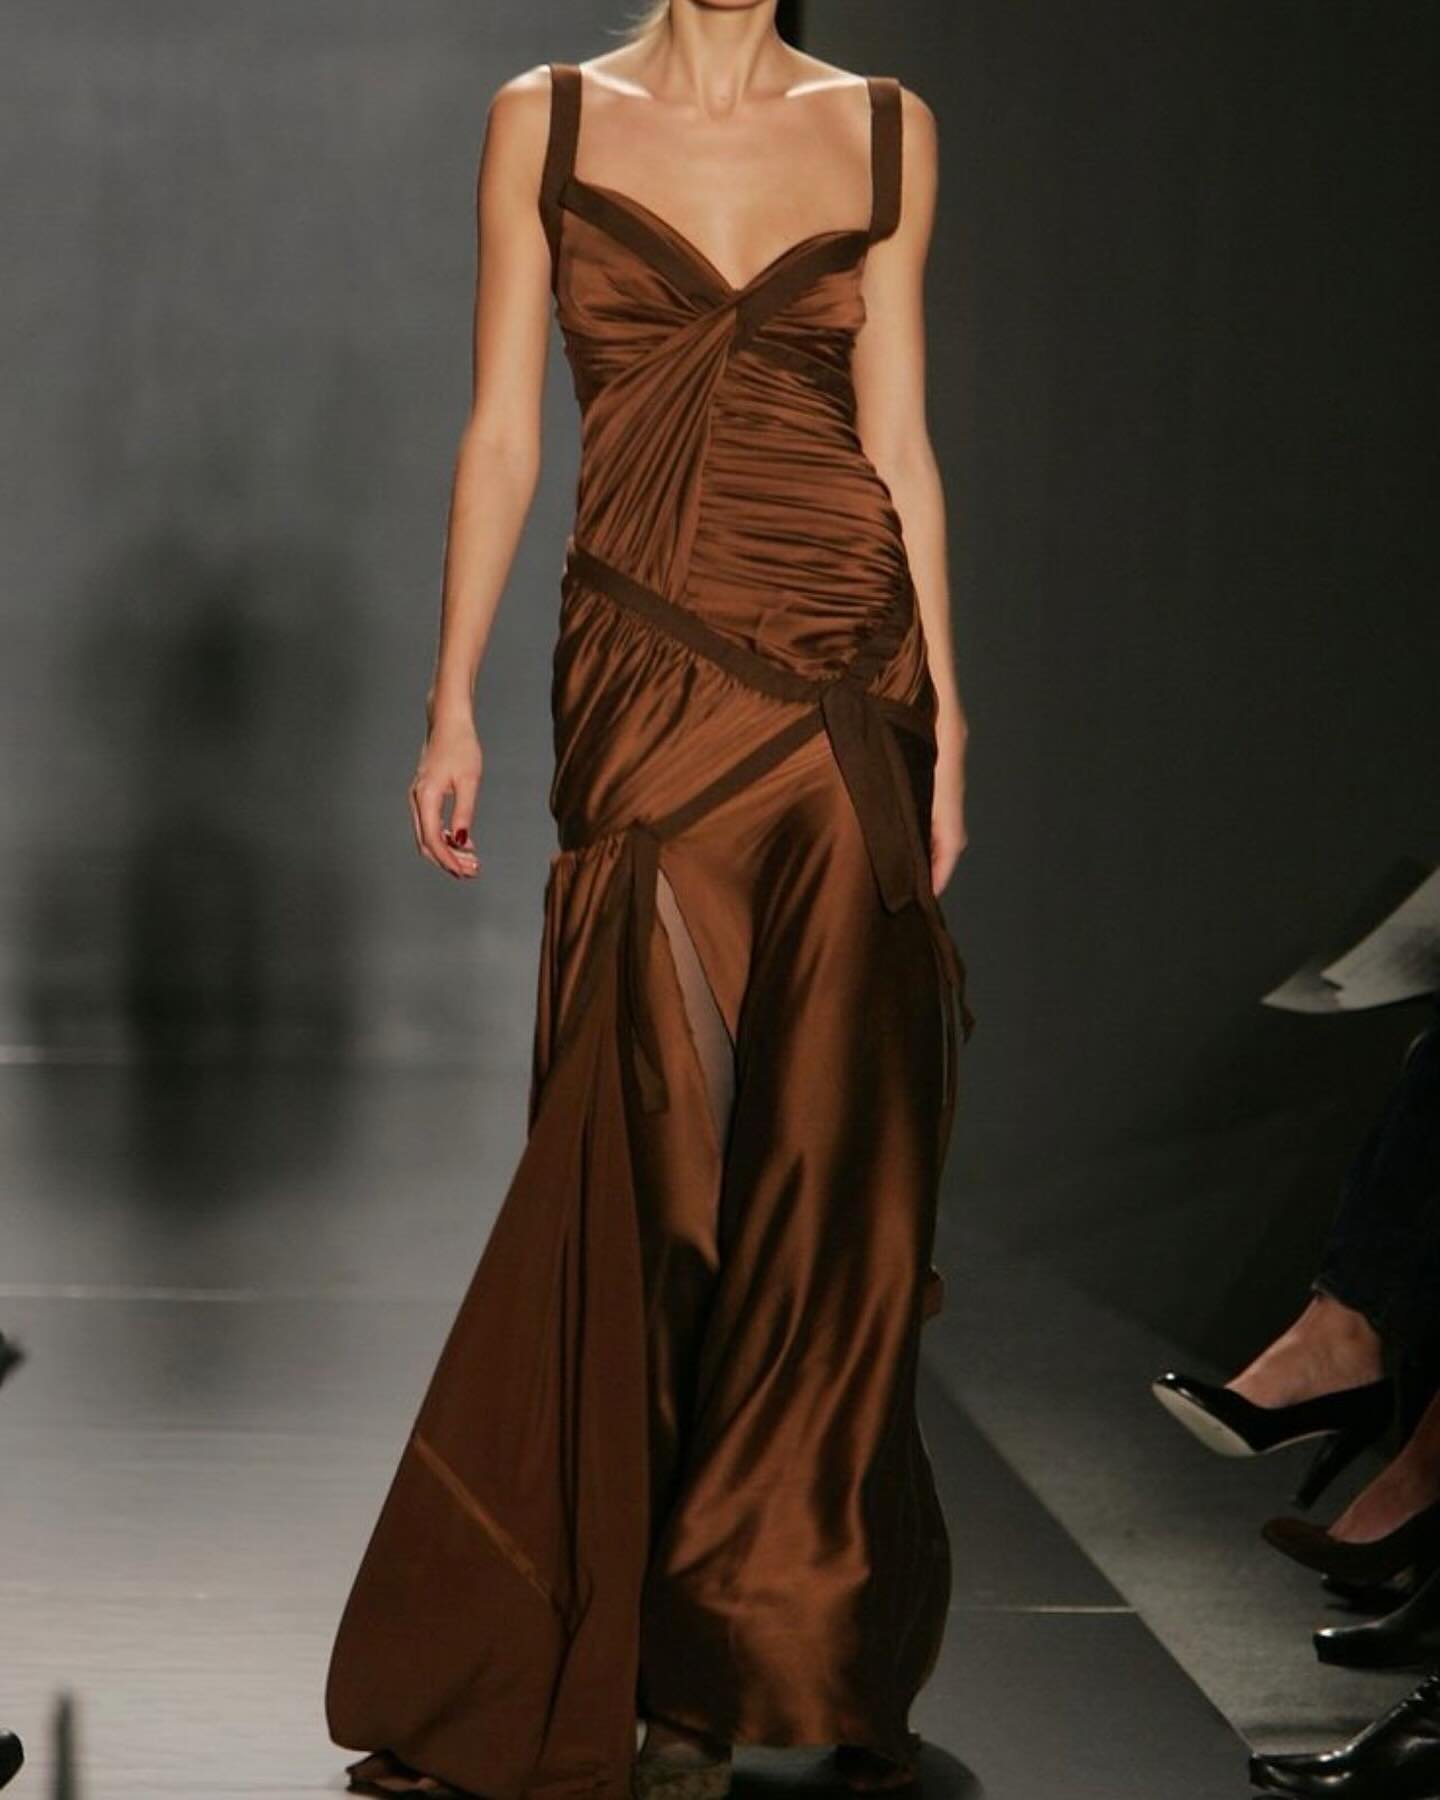 A preview into our Private Collection: a Donna Karan F/W 2005 silk evening gown ☕️ This gown style was worn by Carolyn Murphy at the 2005 Met Gala and is also housed at the Philadelphia Musuem of Art. The collection was dubbed &ldquo;Manhattan Rush&r